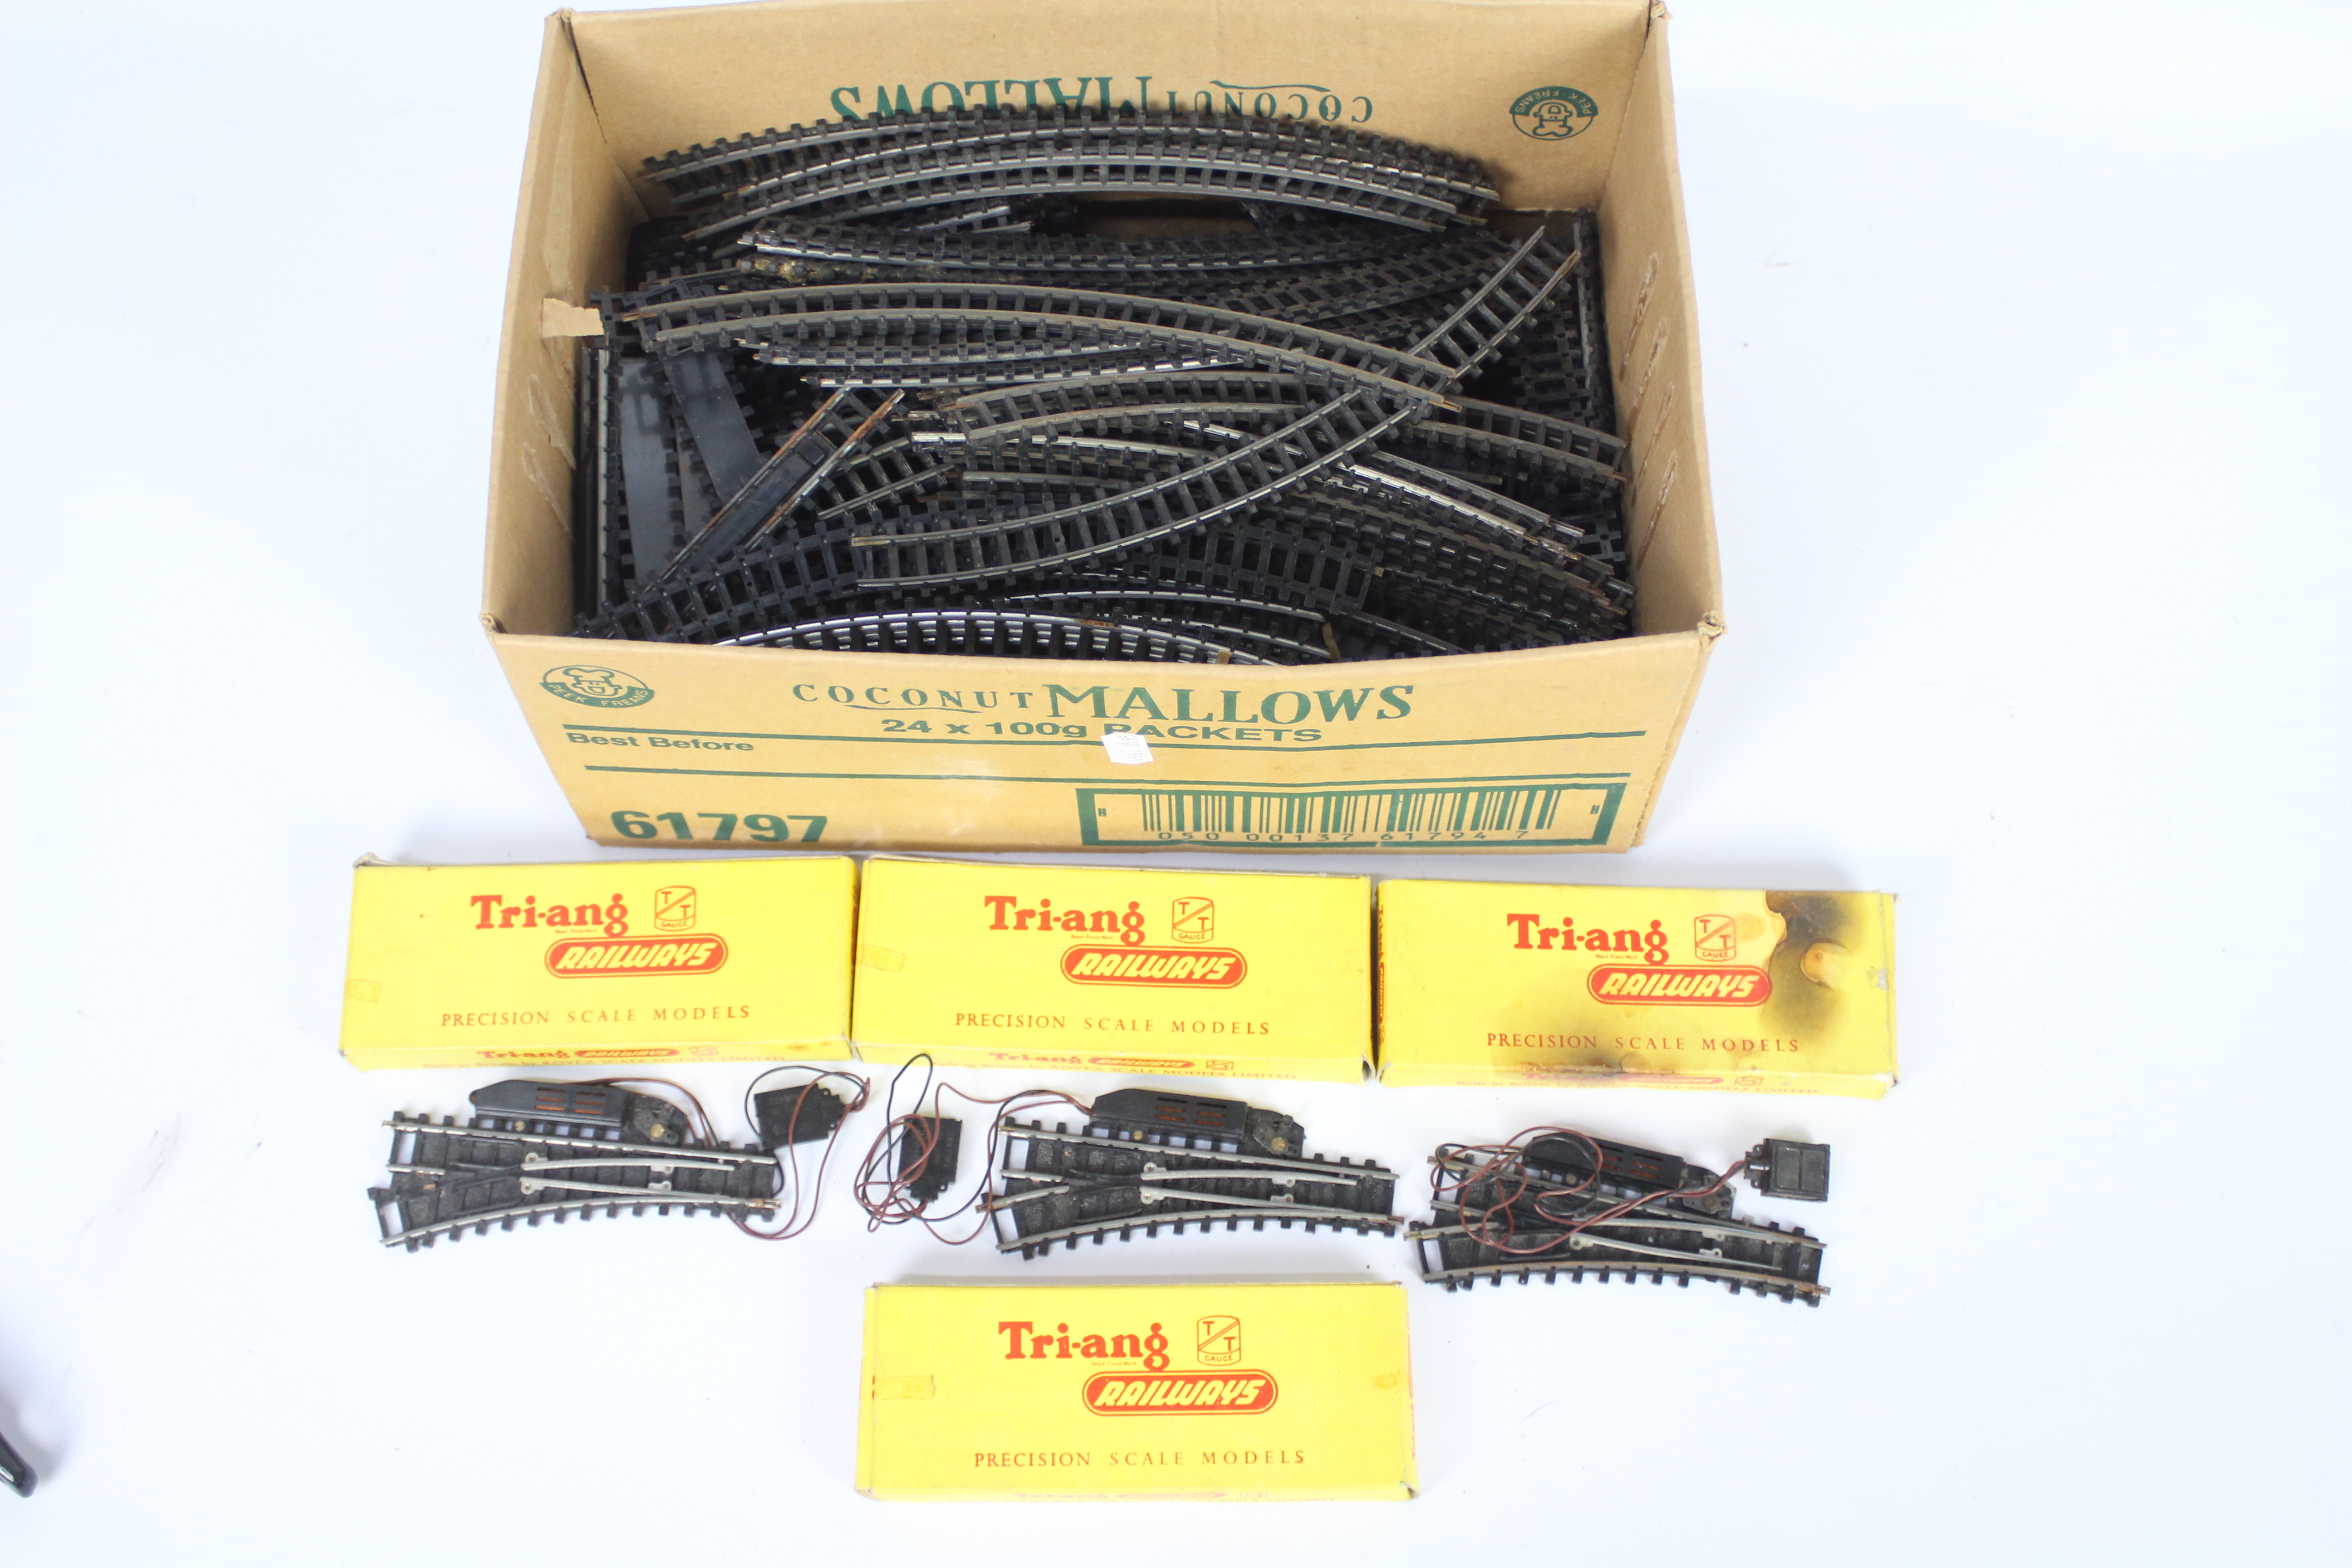 Triang - A quantity of boxed and unboxed TT gauge and OO gauge track - Lot includes a boxed T.